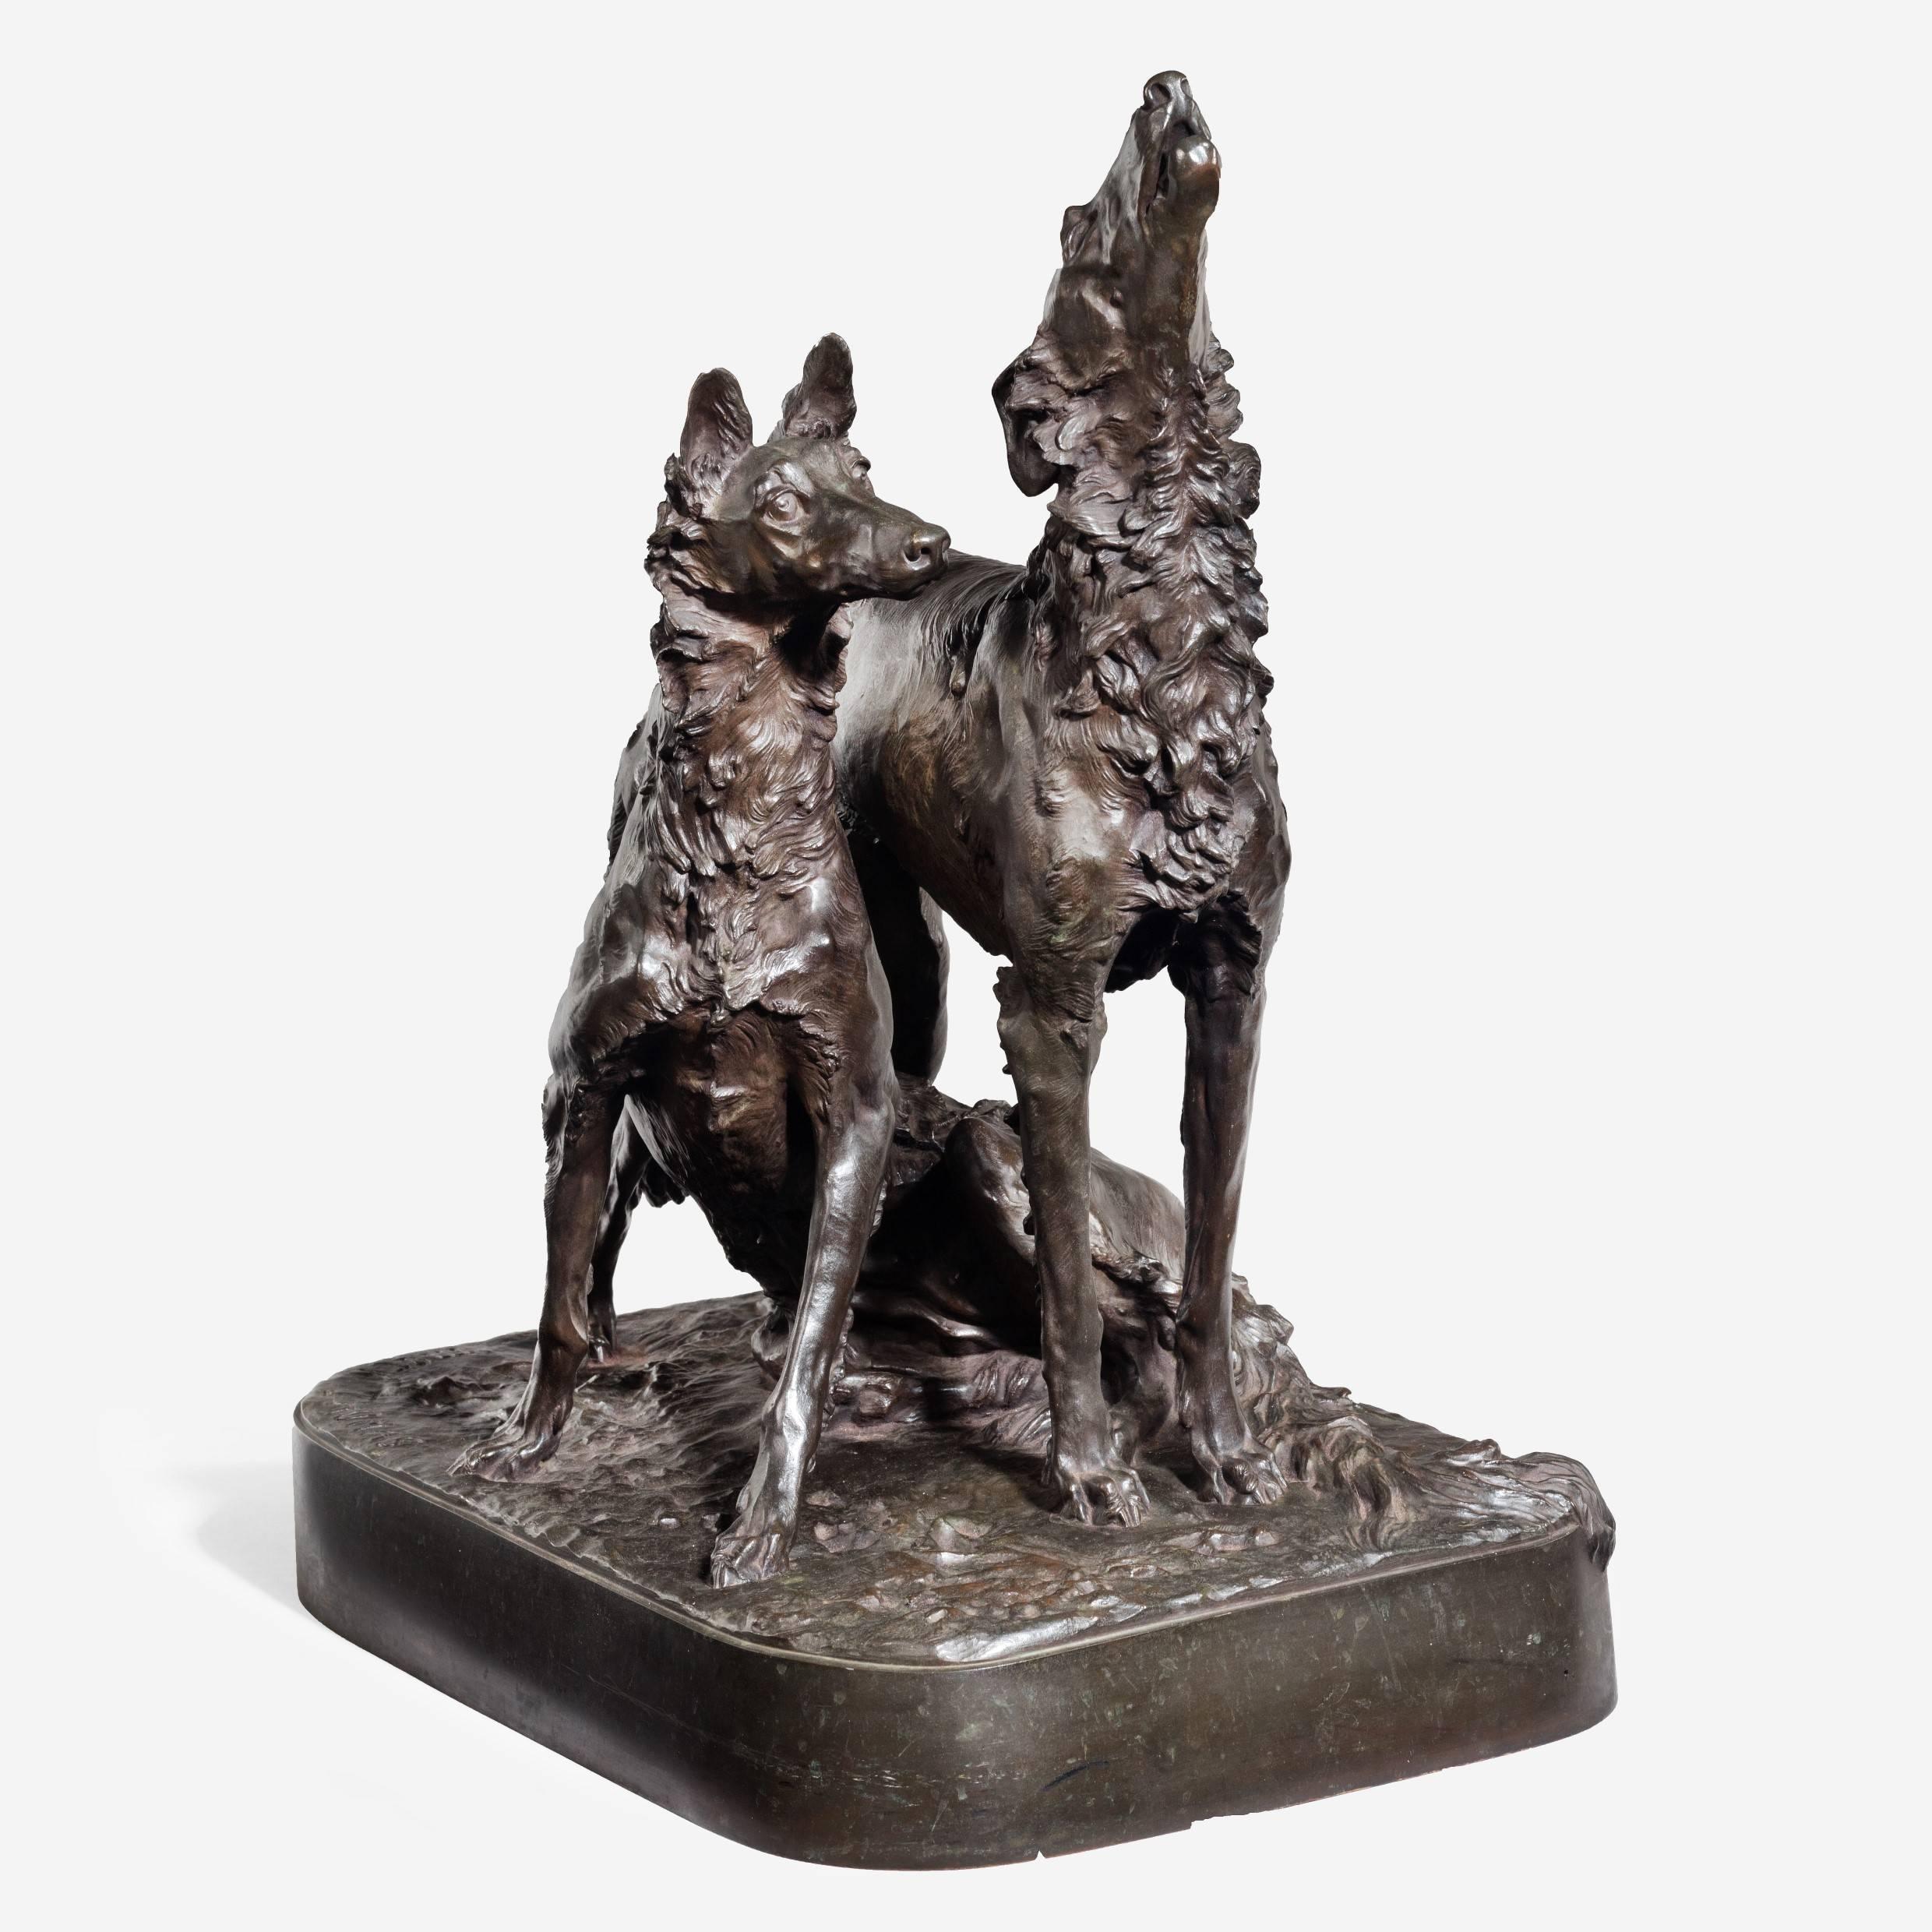 An attractive patinated bronze group of two hounds by Mark Thomas, showing one dog standing with muzzle raised in a howl and the other seated between its legs. 

Signed: Mark Thomas, stamped Thiebault fres. Foundry, Paris.